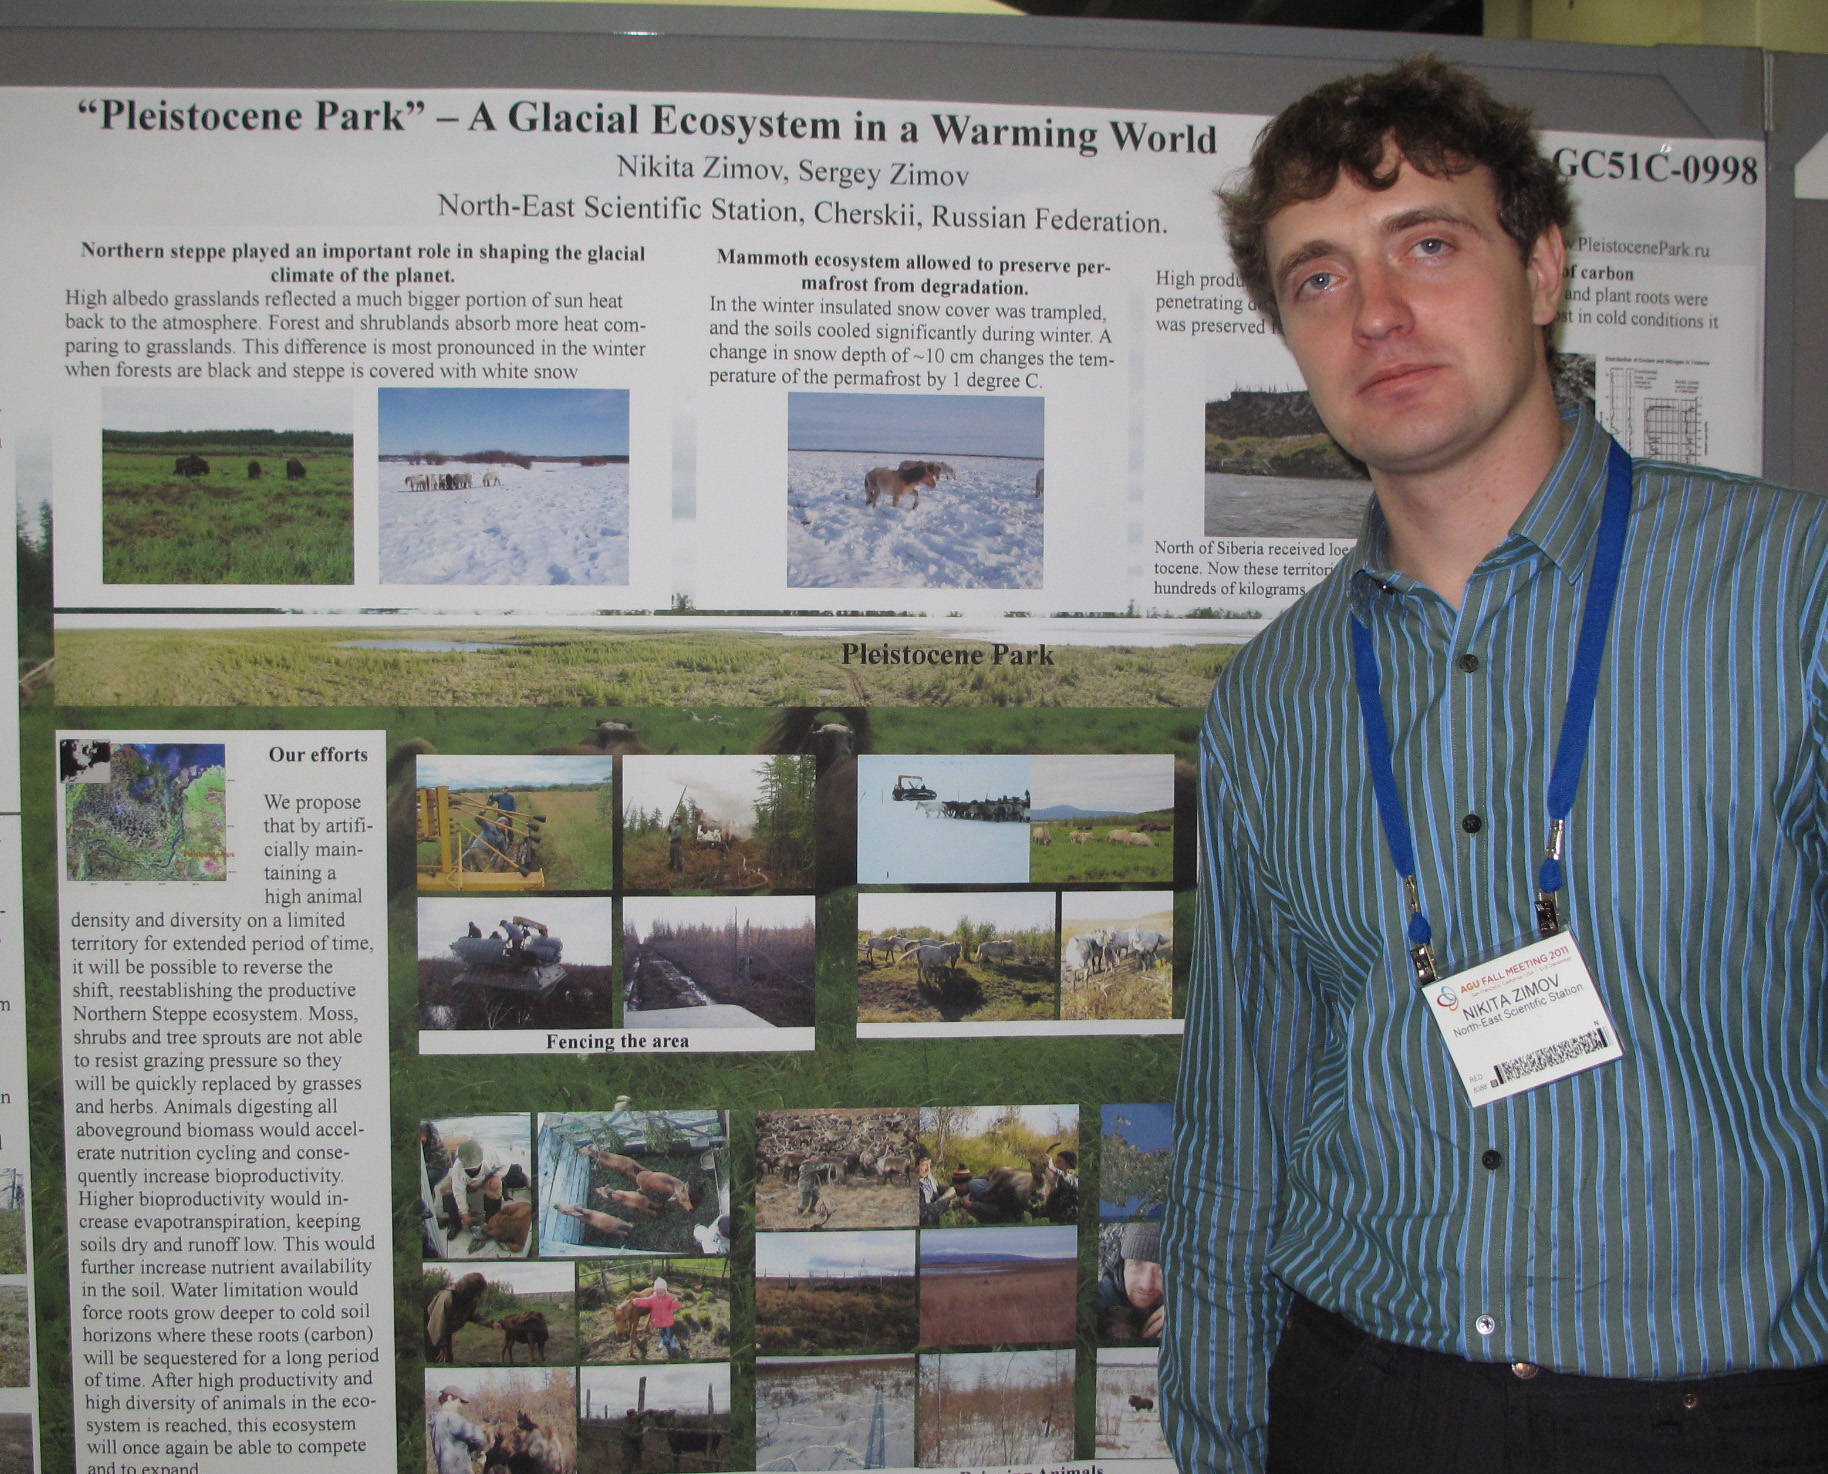 Nikita Zimov at a 2011 science conference in San Francisco. (Photo by Ned Rozell)